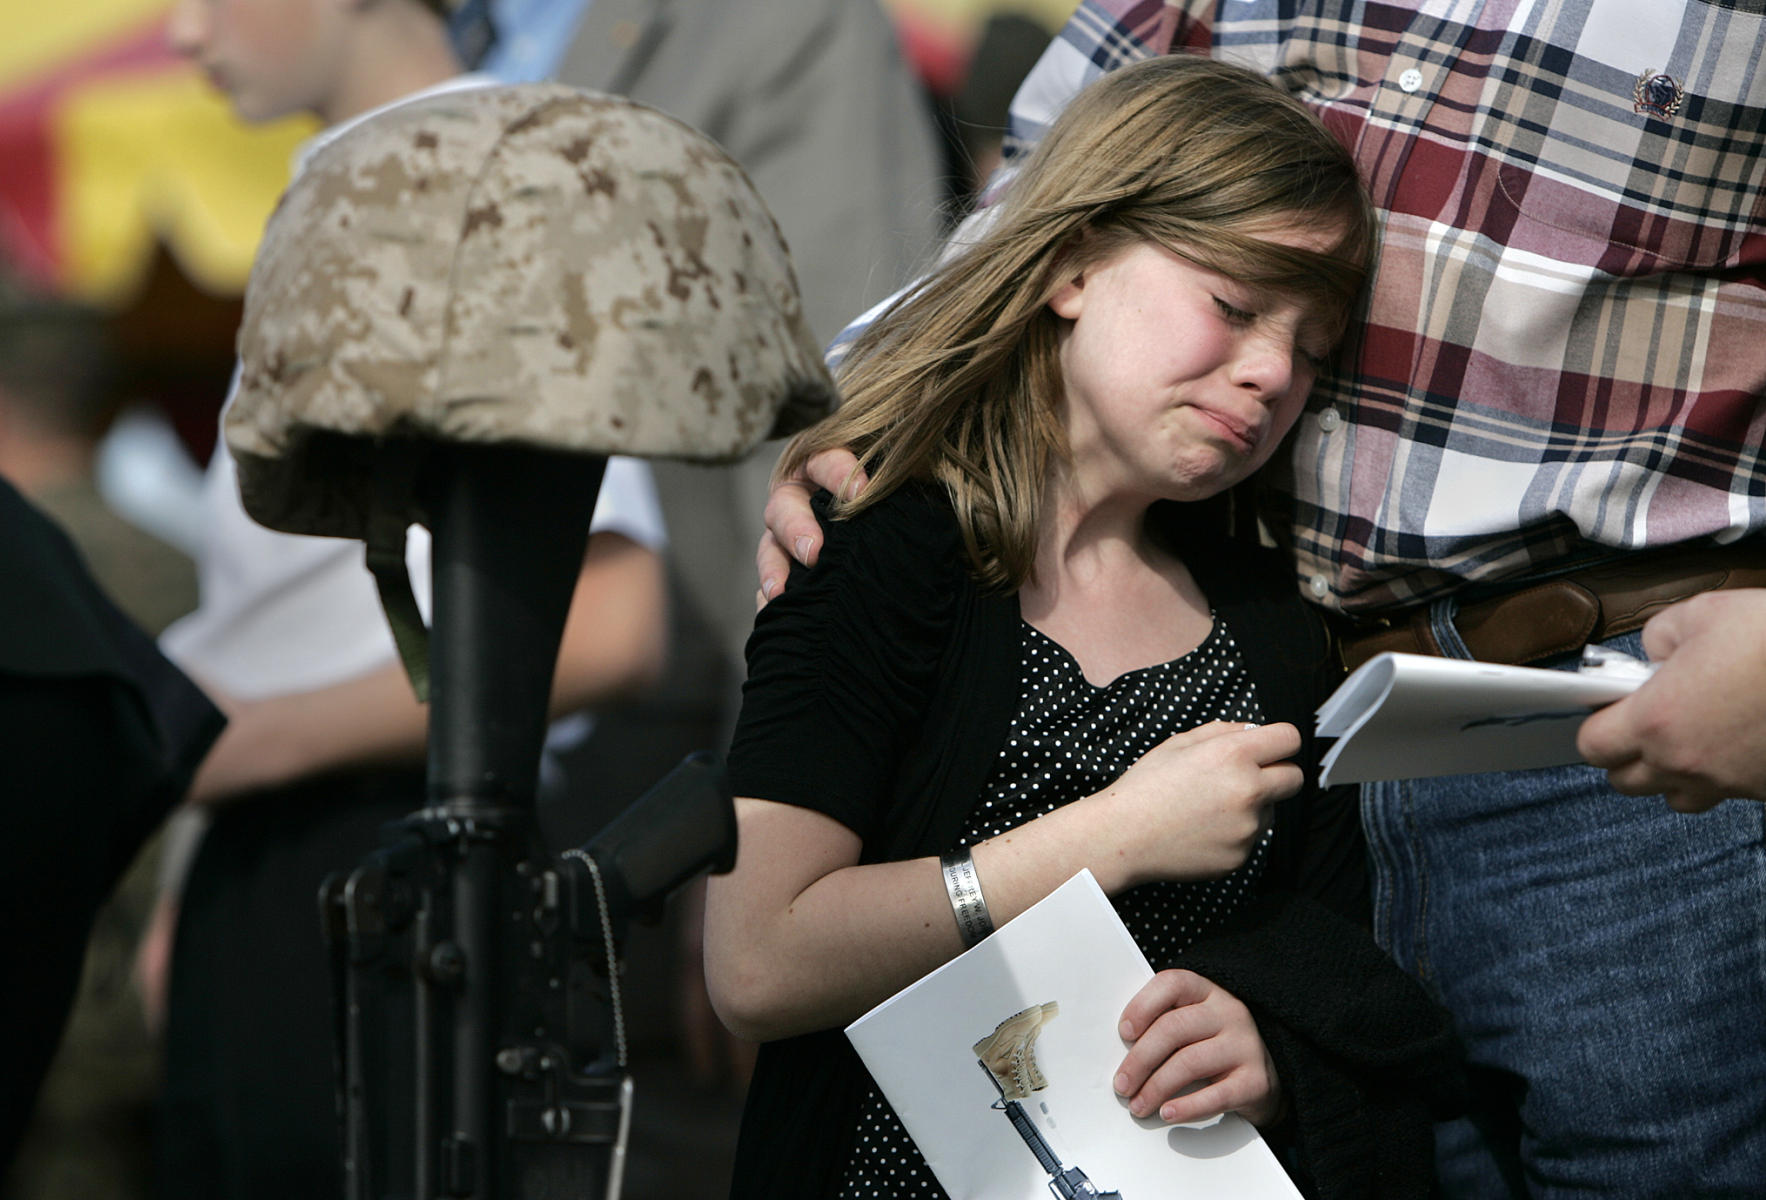 Little sister crying at Marine brother's memorial service, Camp Pendleton, CA